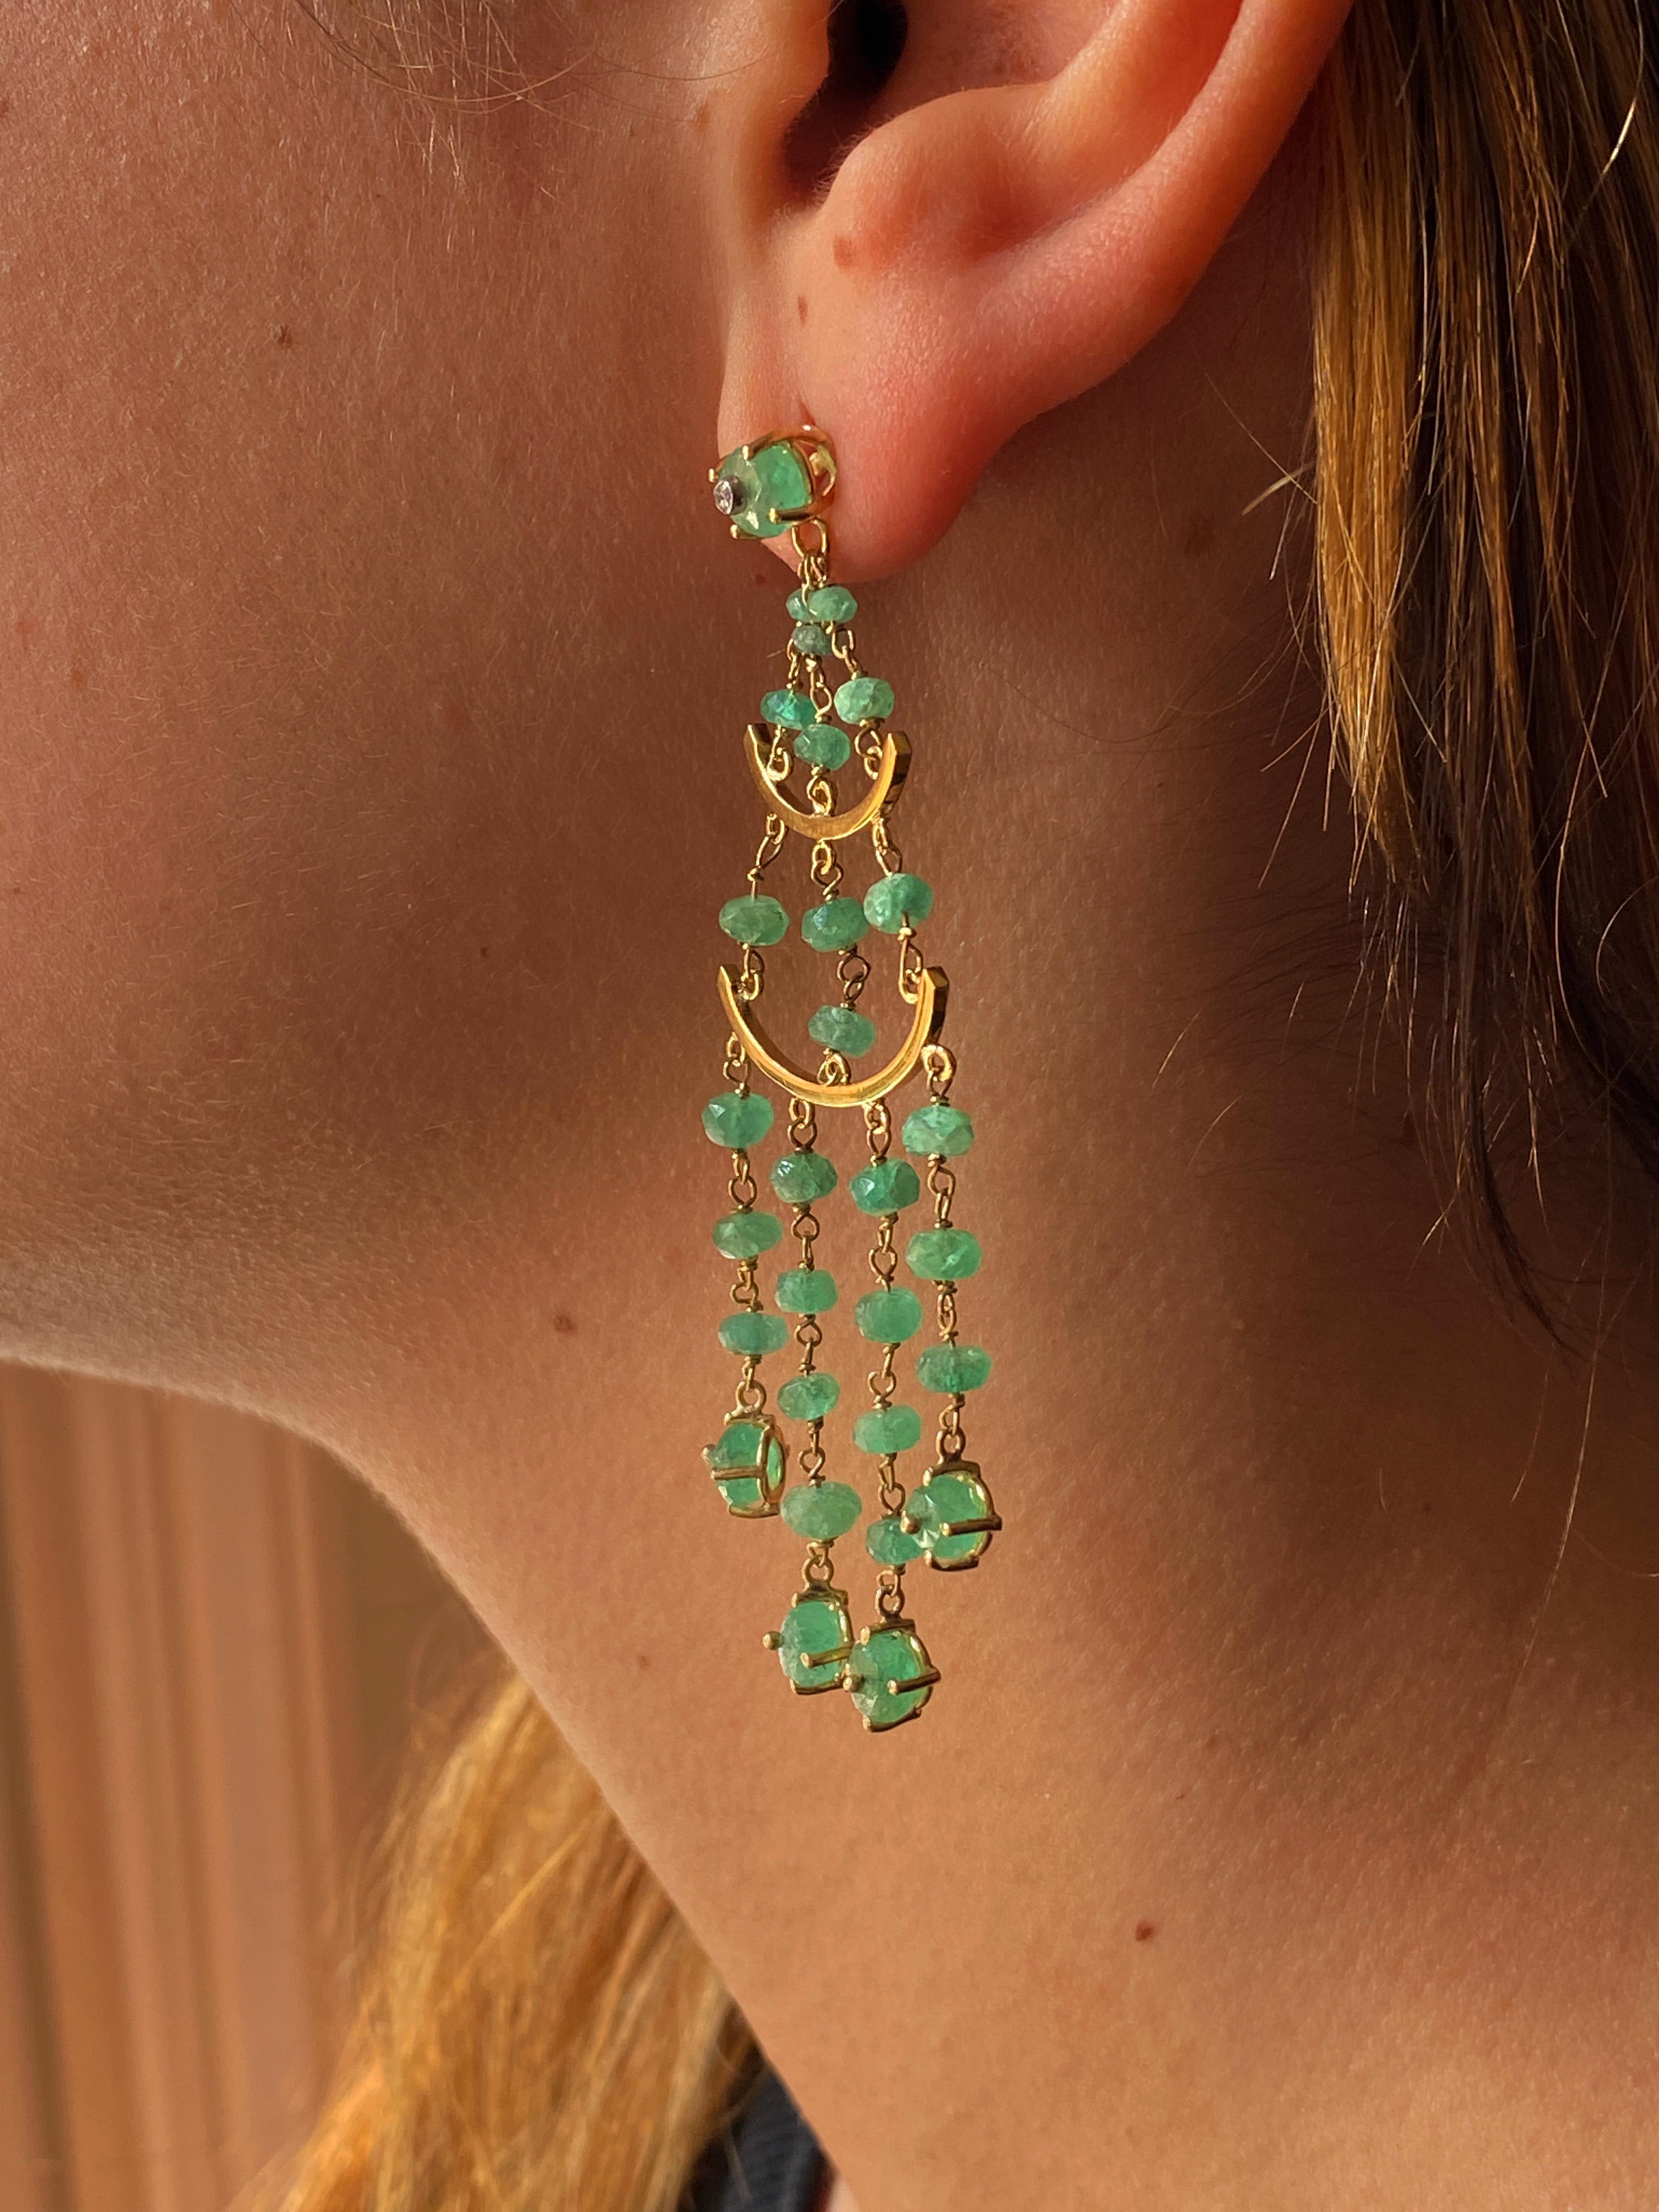 Introducing Rossella Ugolini's Exquisite Handcrafted Chandelier Emerald Earrings, a testament to the beauty of Italian craftsmanship. These mesmerizing earrings feature a cascade of 60 Emerald beads and Diamonds, meticulously crafted in 18k yellow